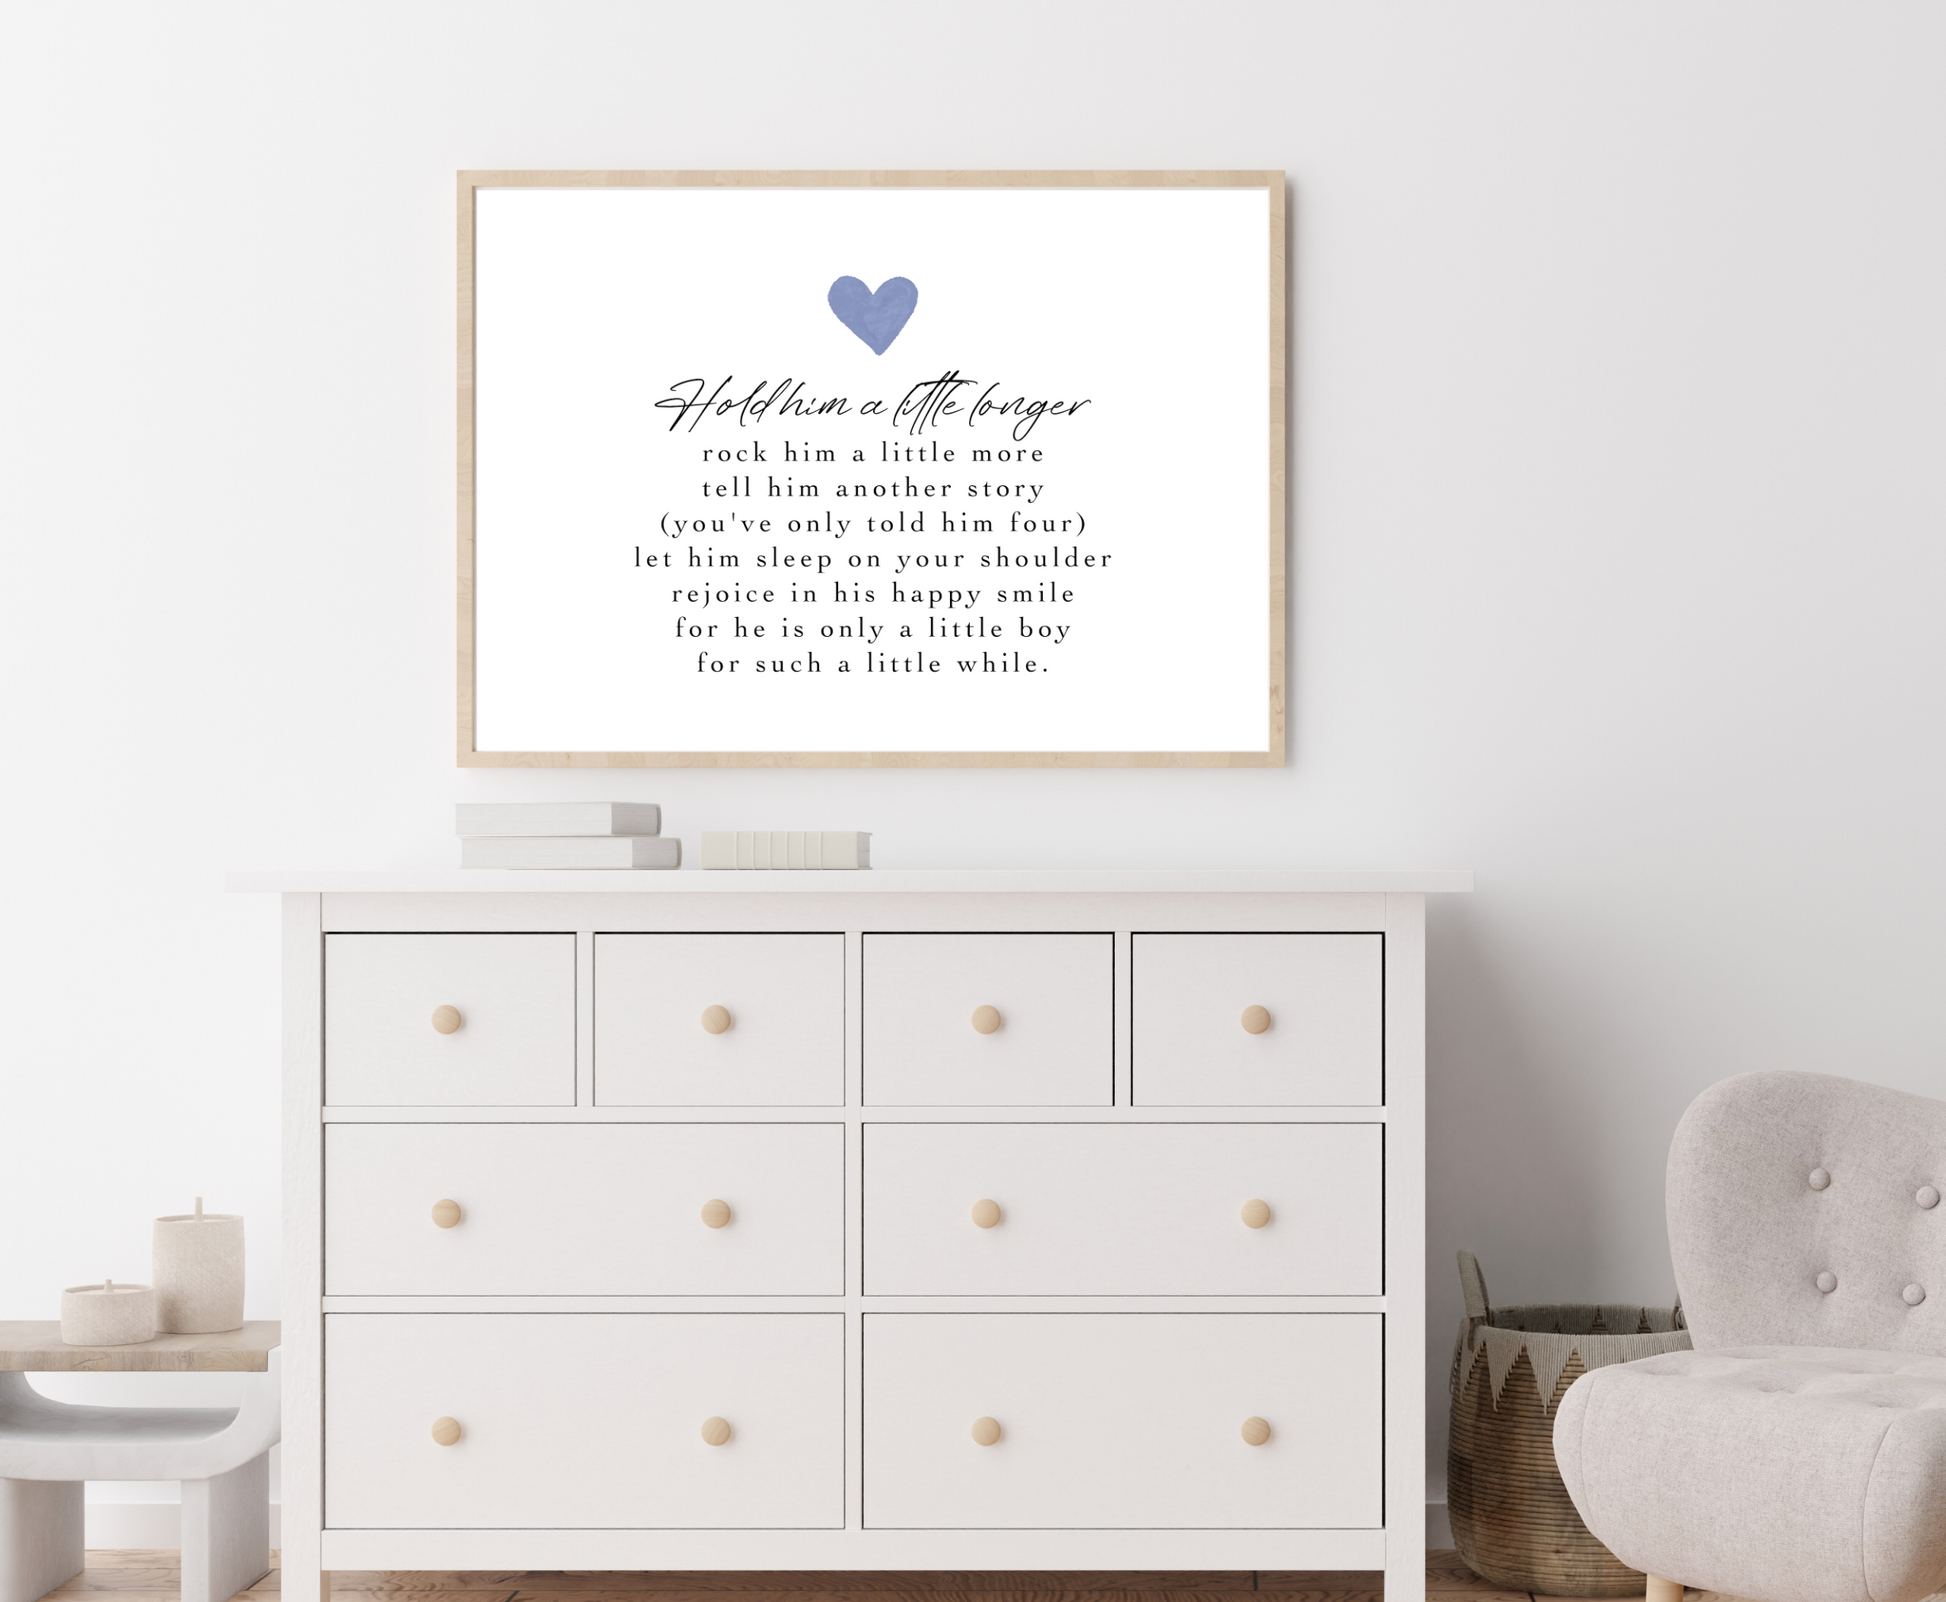 A digital print is placed above a nursery wardrobe. The digital print has a blue heart at the top and a piece of writing that says: Hold him a little longer, rock him a little more, tell him another story, (you have only told him four), let him sleep on your shoulder, rejoice in his happy smile, for he is only a little boy, for such a little while.